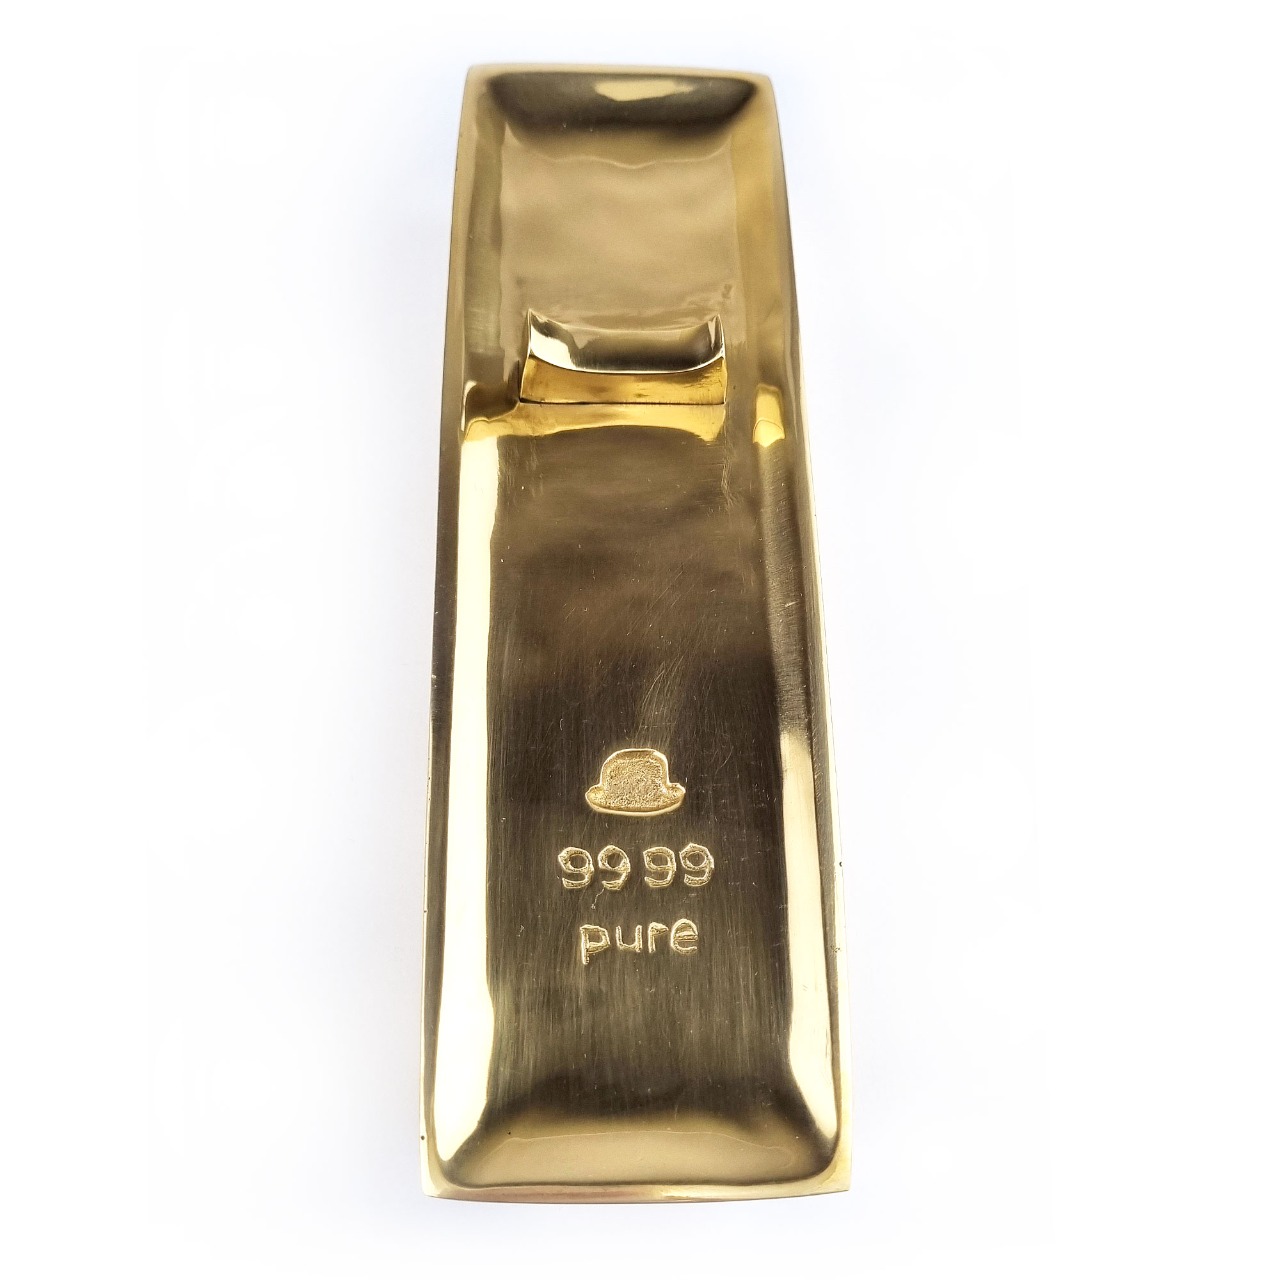 Viral News: This 999.9 Fine Gold Brick is purely edible and comes